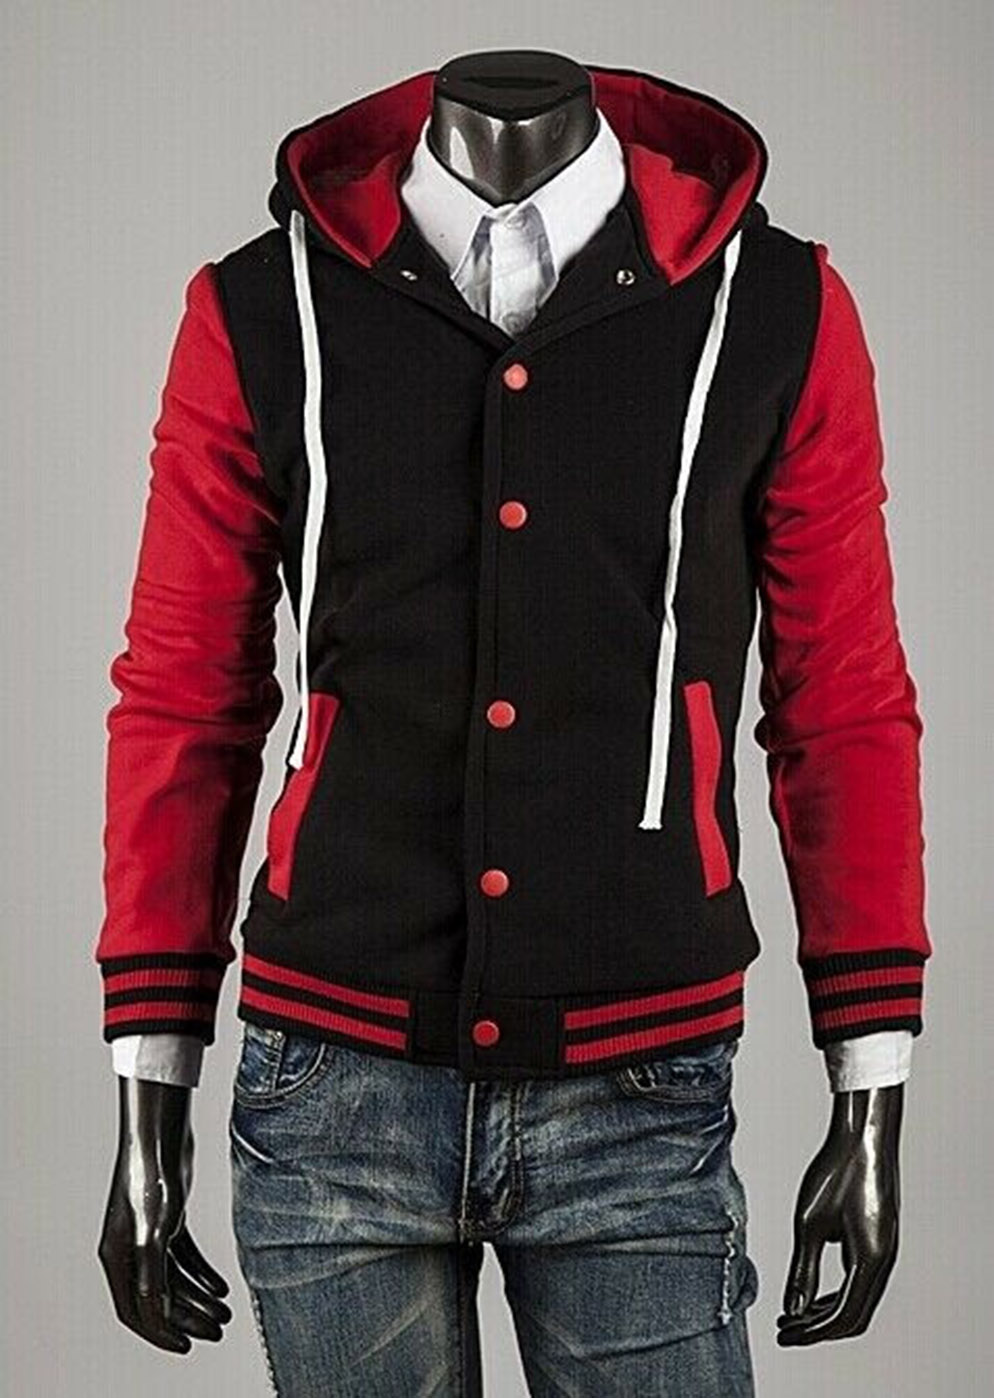 ALHC Letterman Jacket Style hoodie in red & black